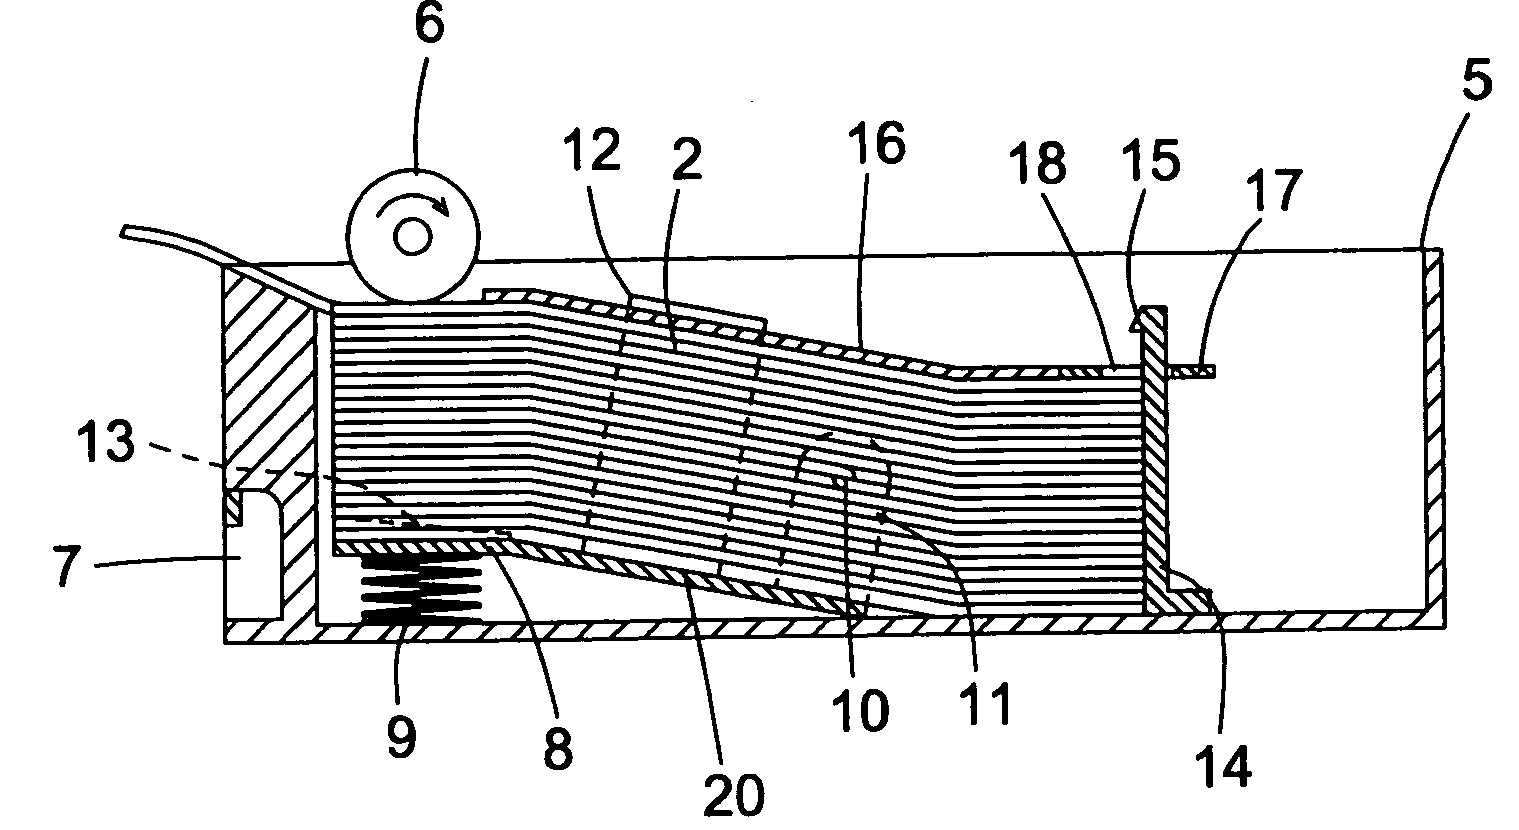 Automatic paper feed apparatus